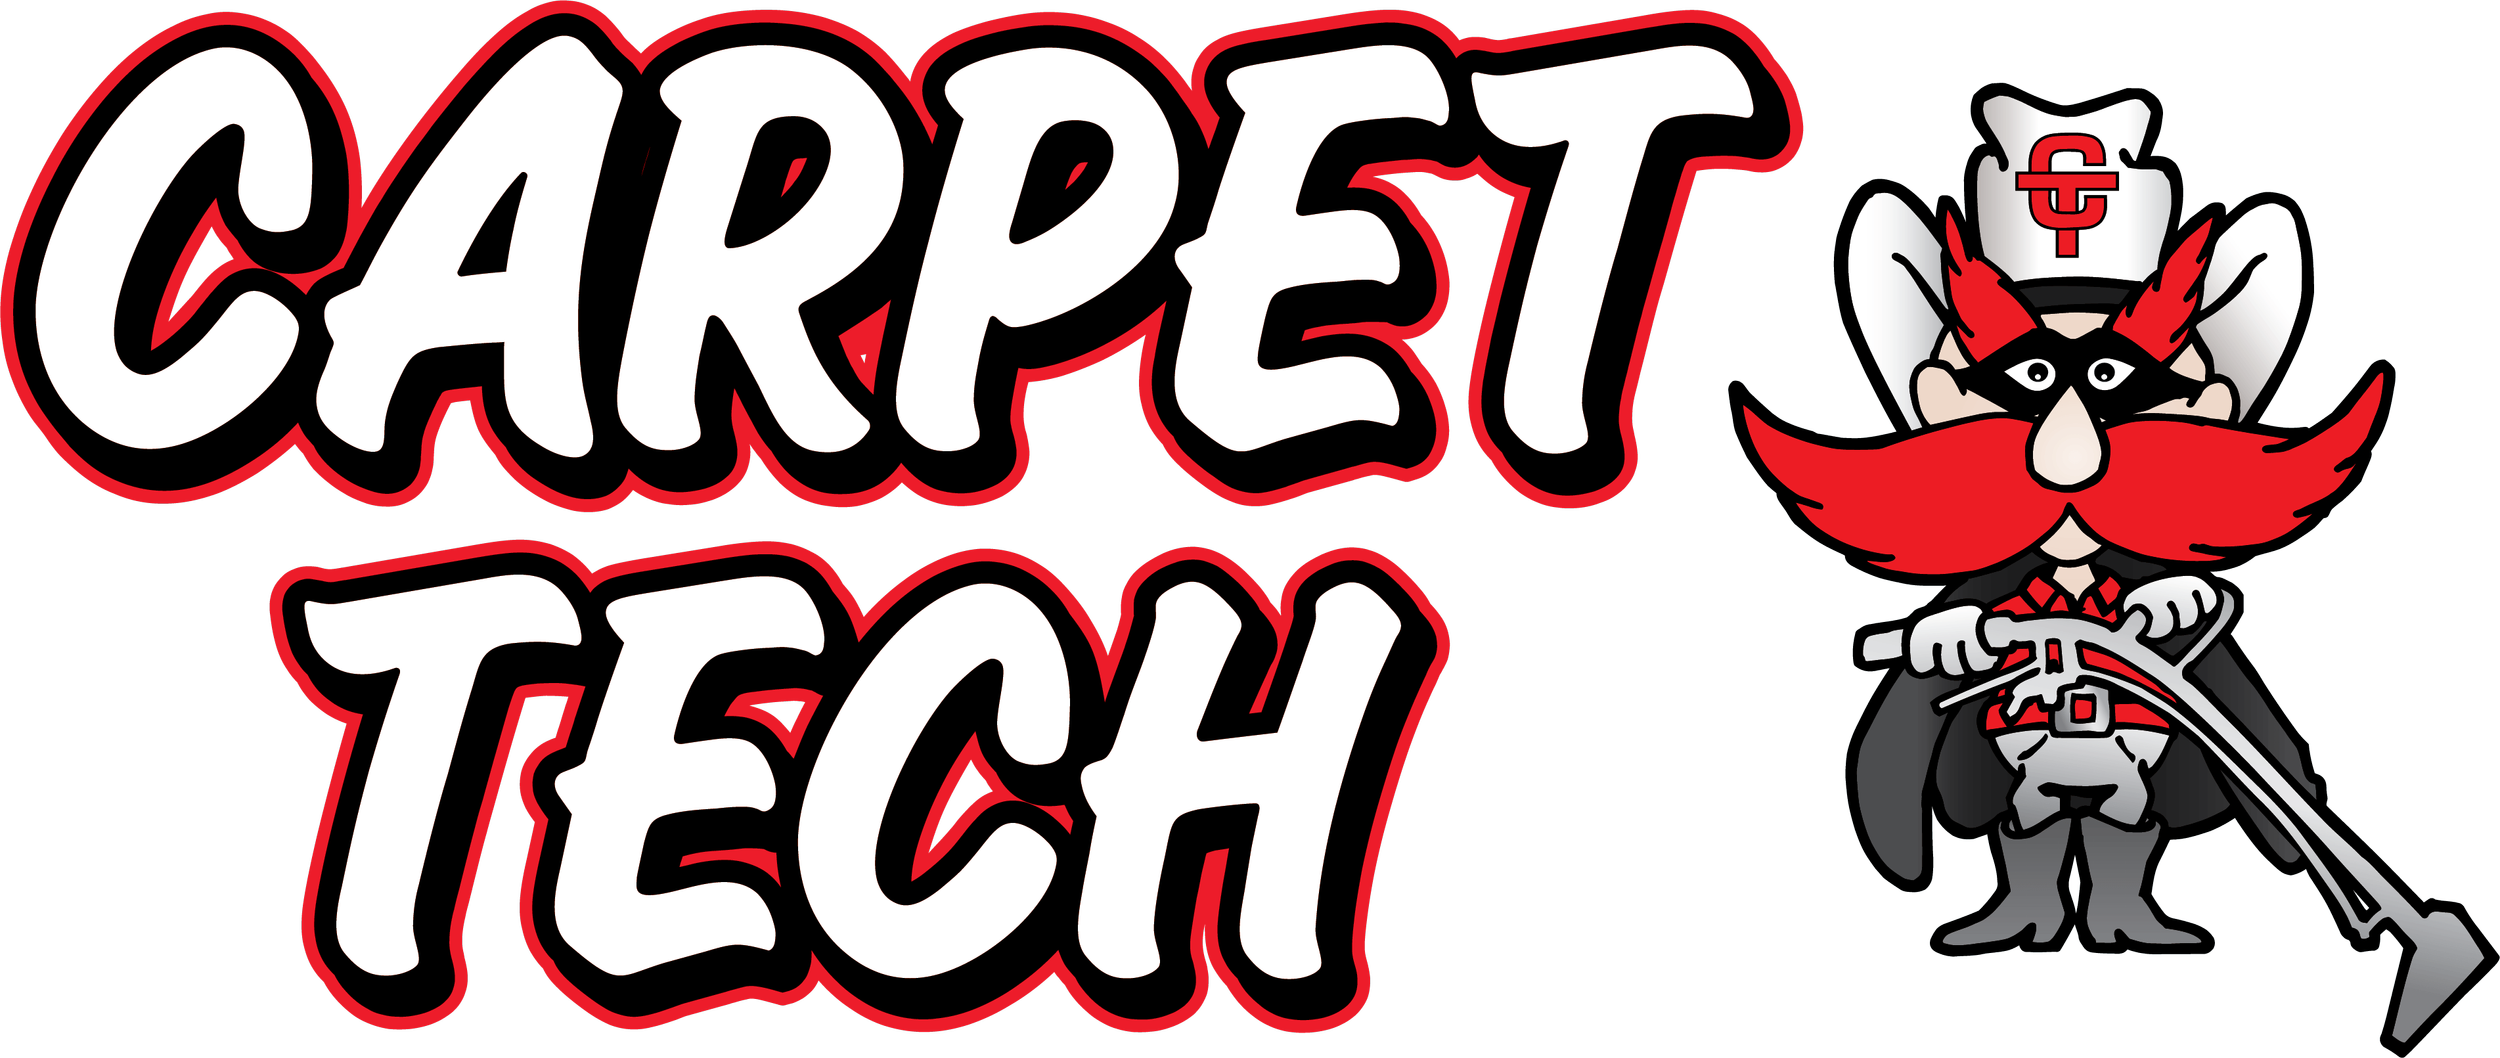 CarpetTech_wJester1.png